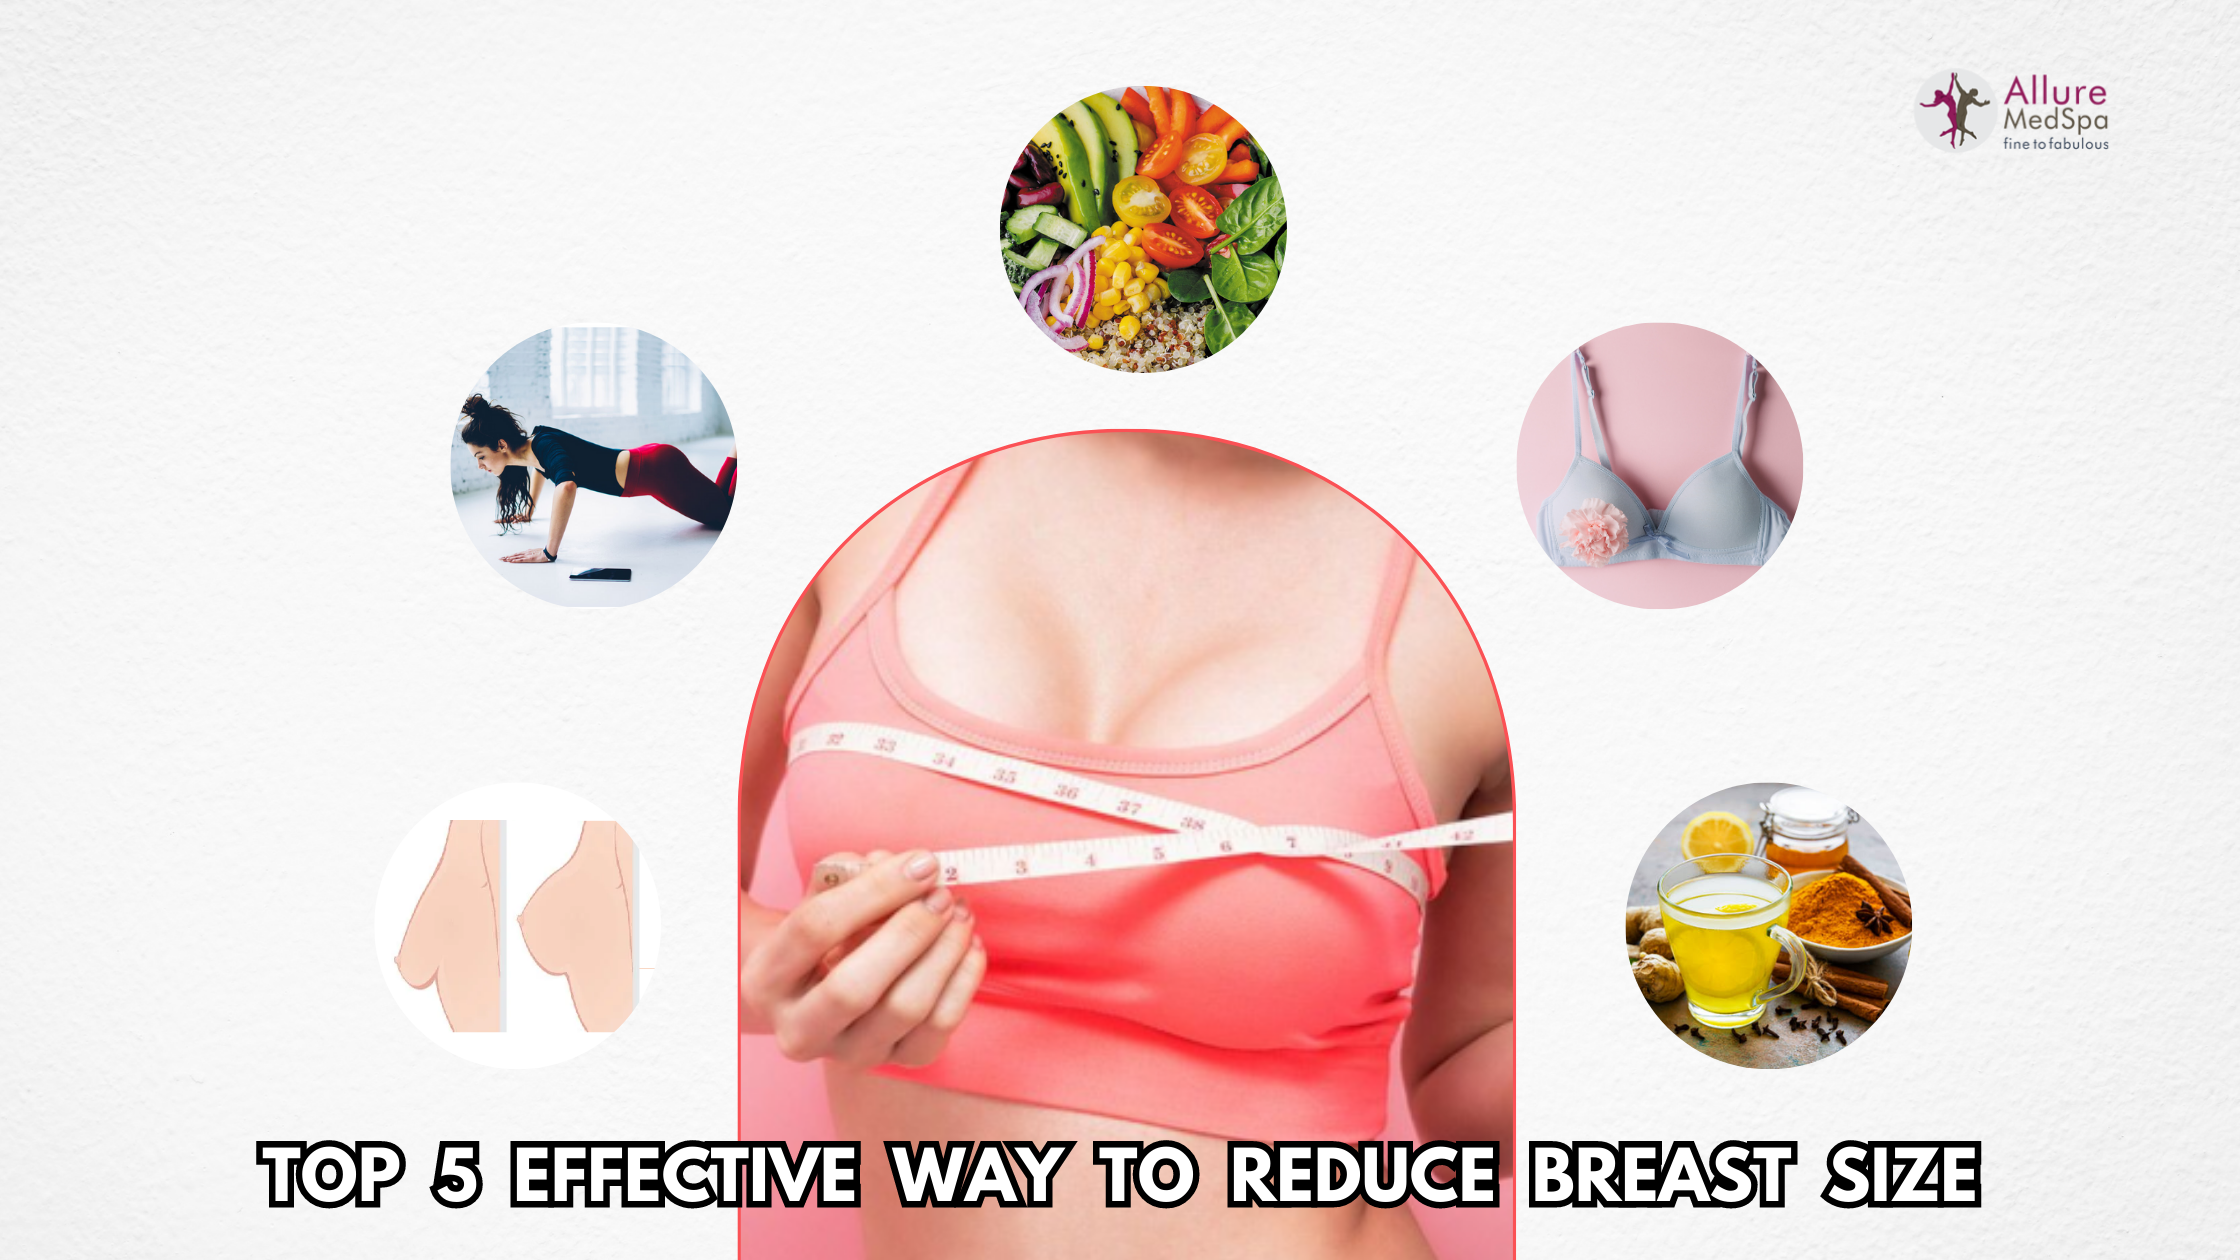 How Hormones Affect Your Breast Health and What You Can Do About